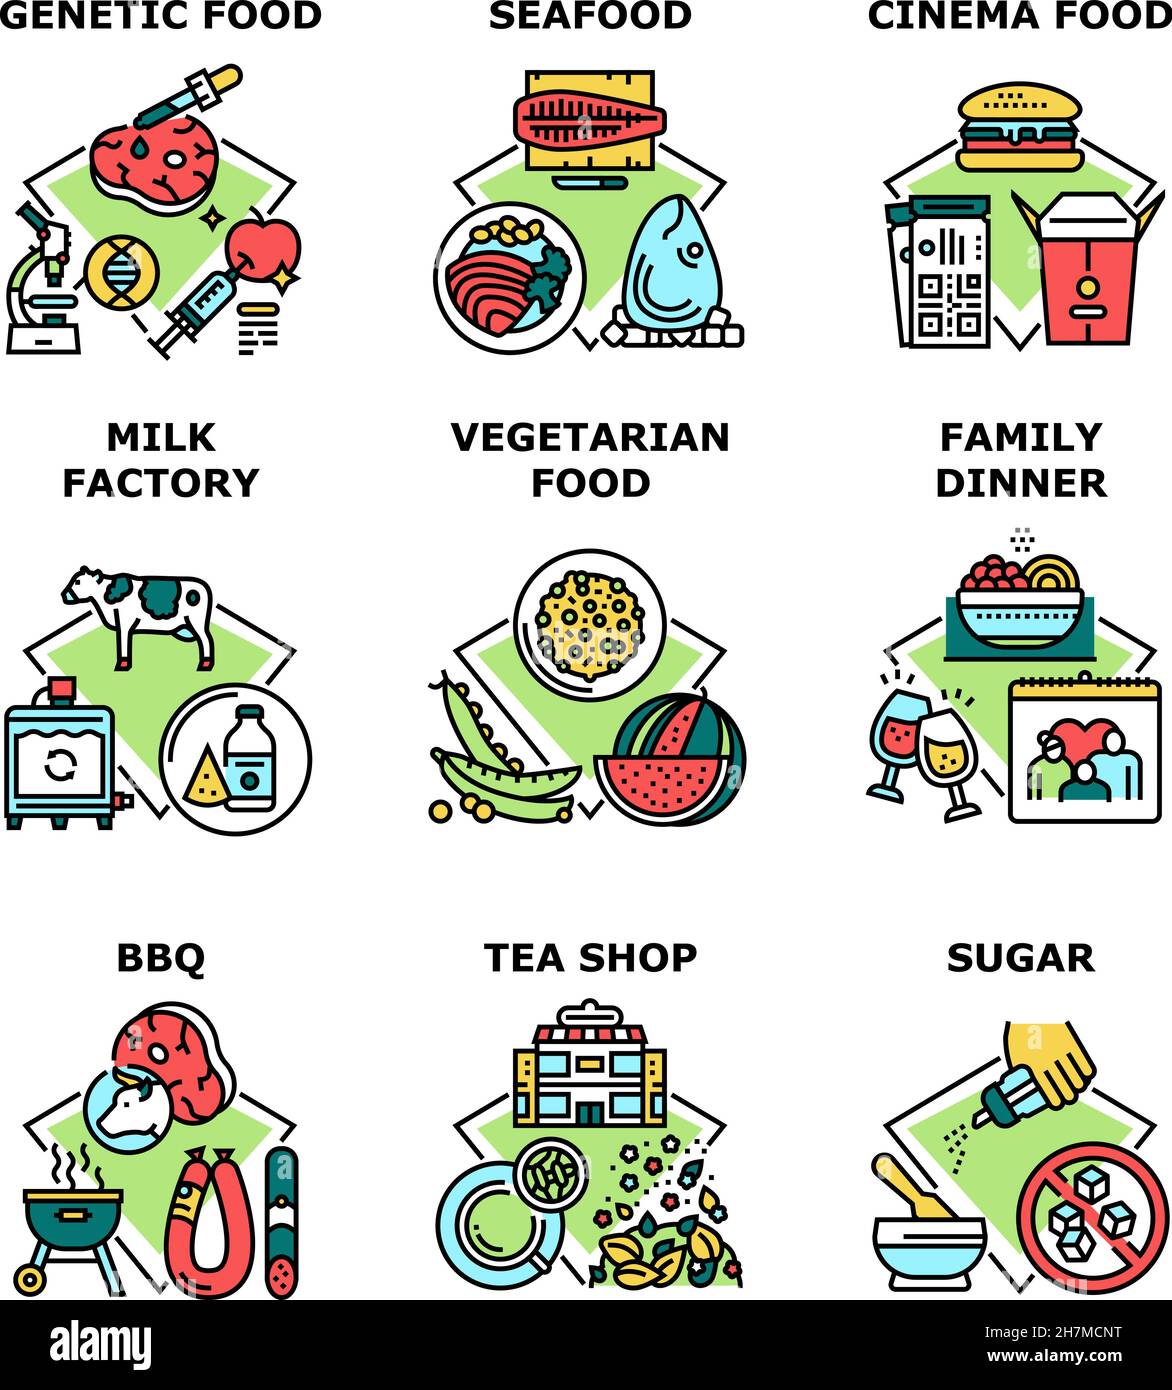 Food Family Dinner Set Icons Vector Illustrations Stock Vector